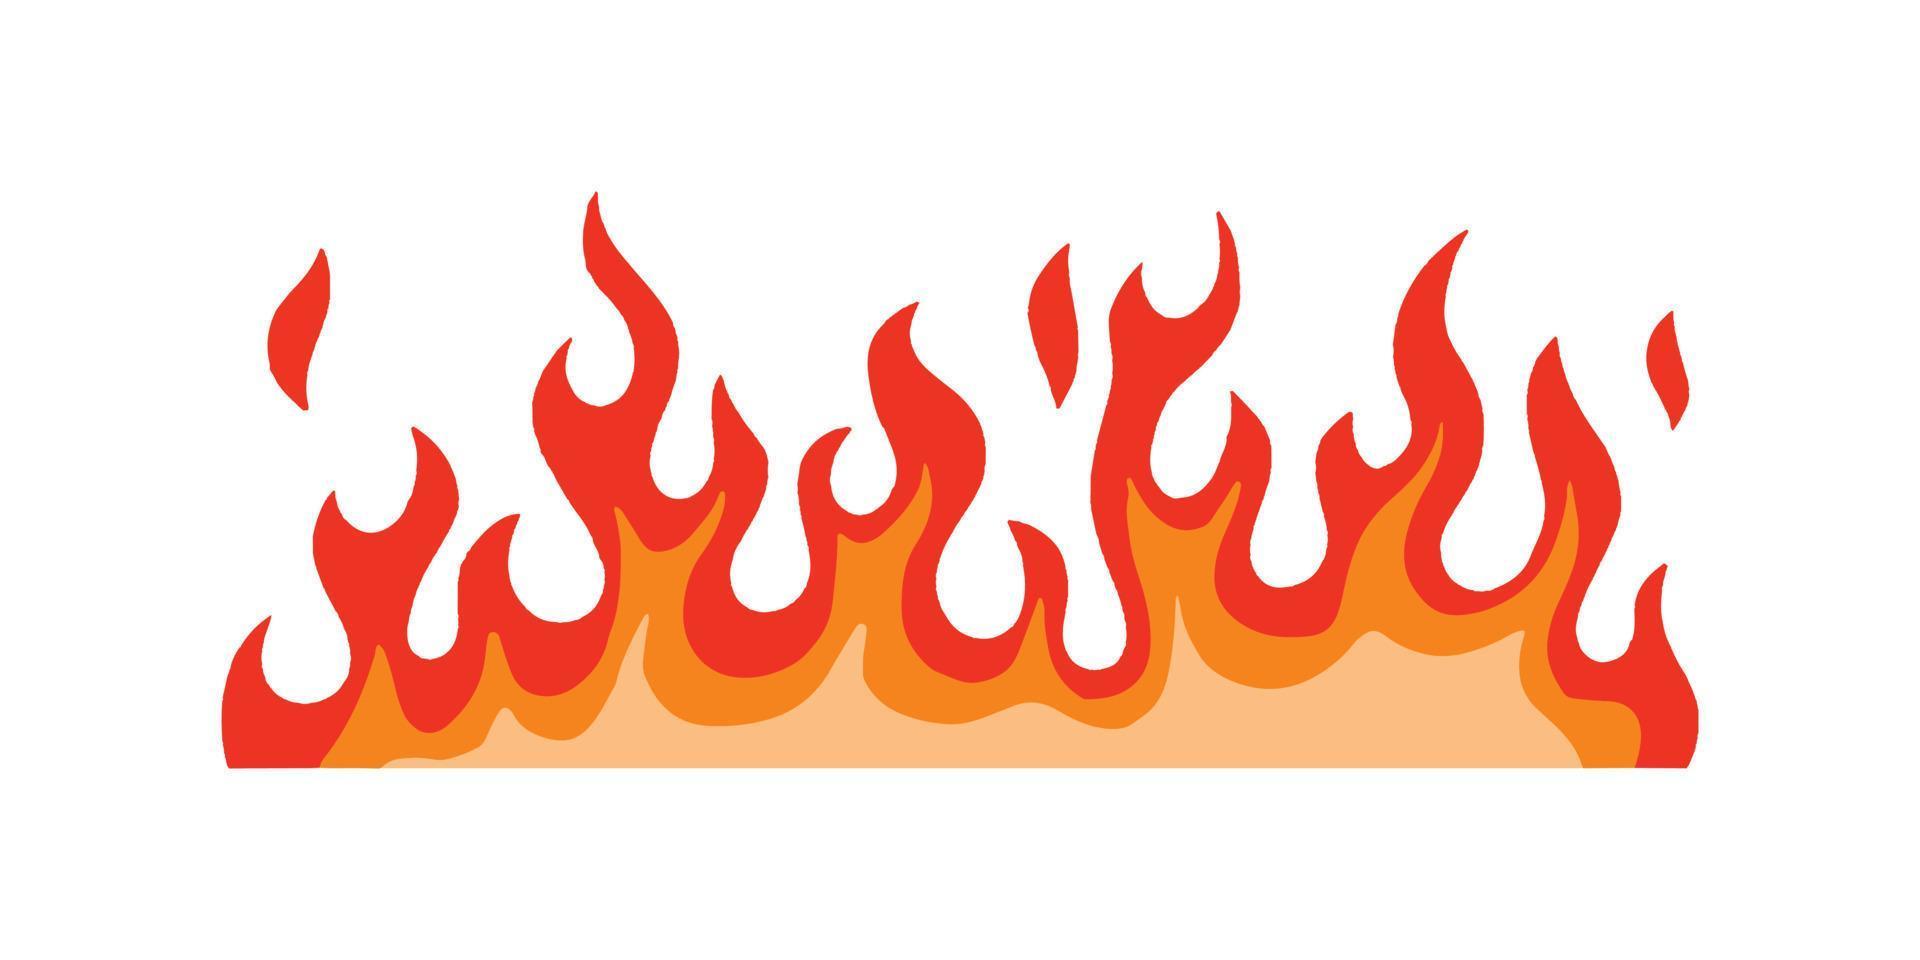 fire and flames in cartoon illustration for design element vector